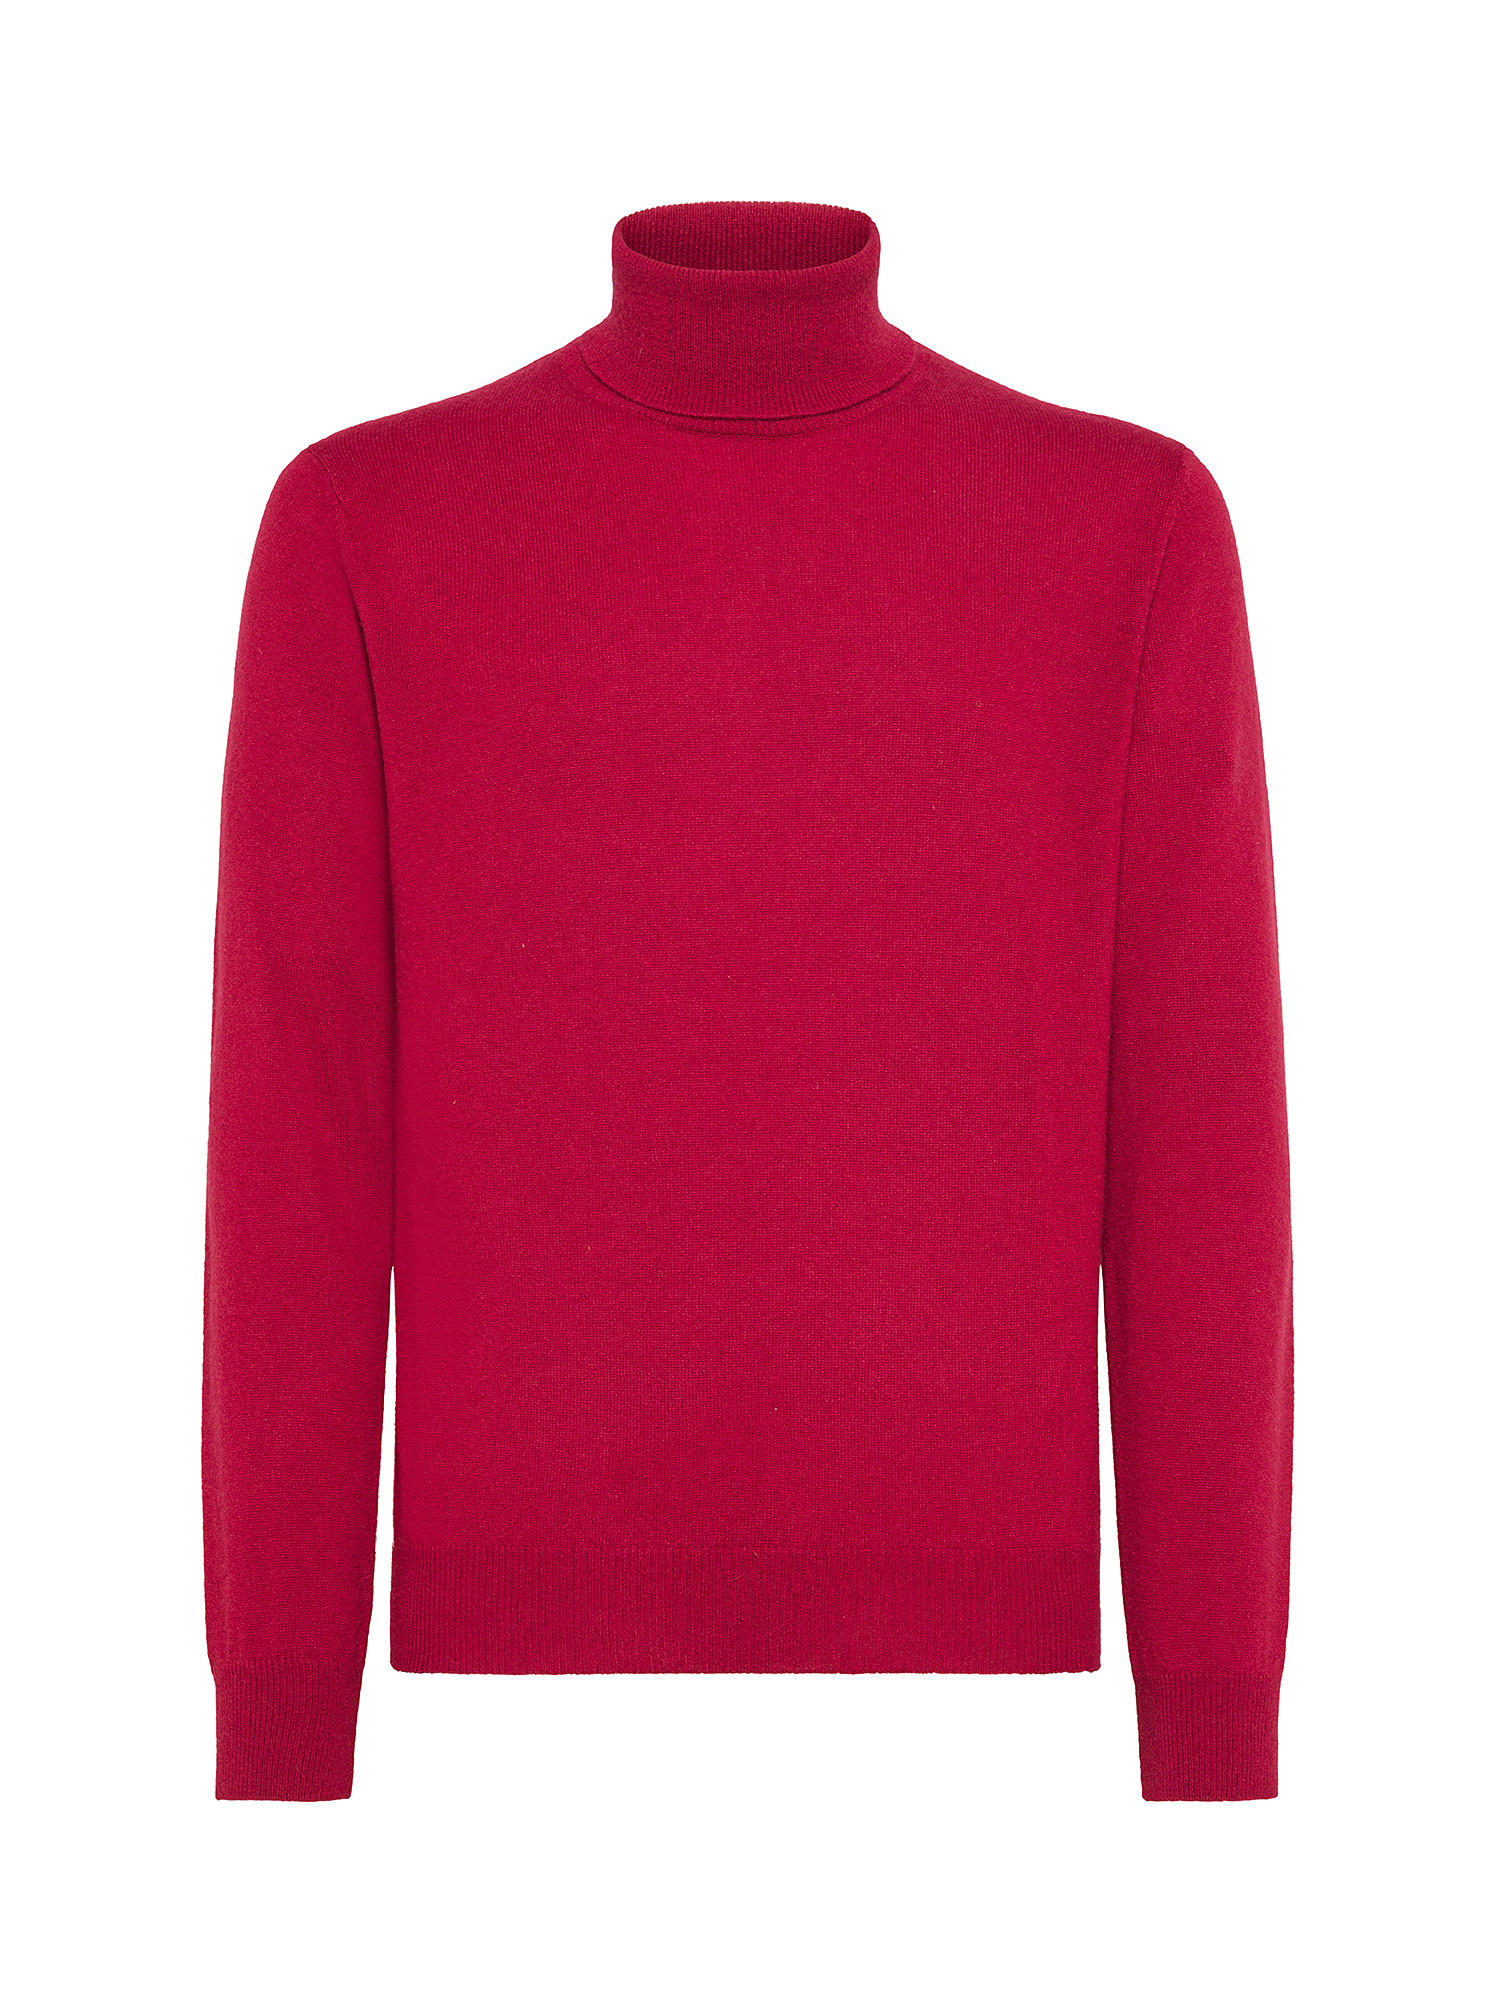 Coin Cashmere - Dolcevita in puro cashmere, Rosso, large image number 0